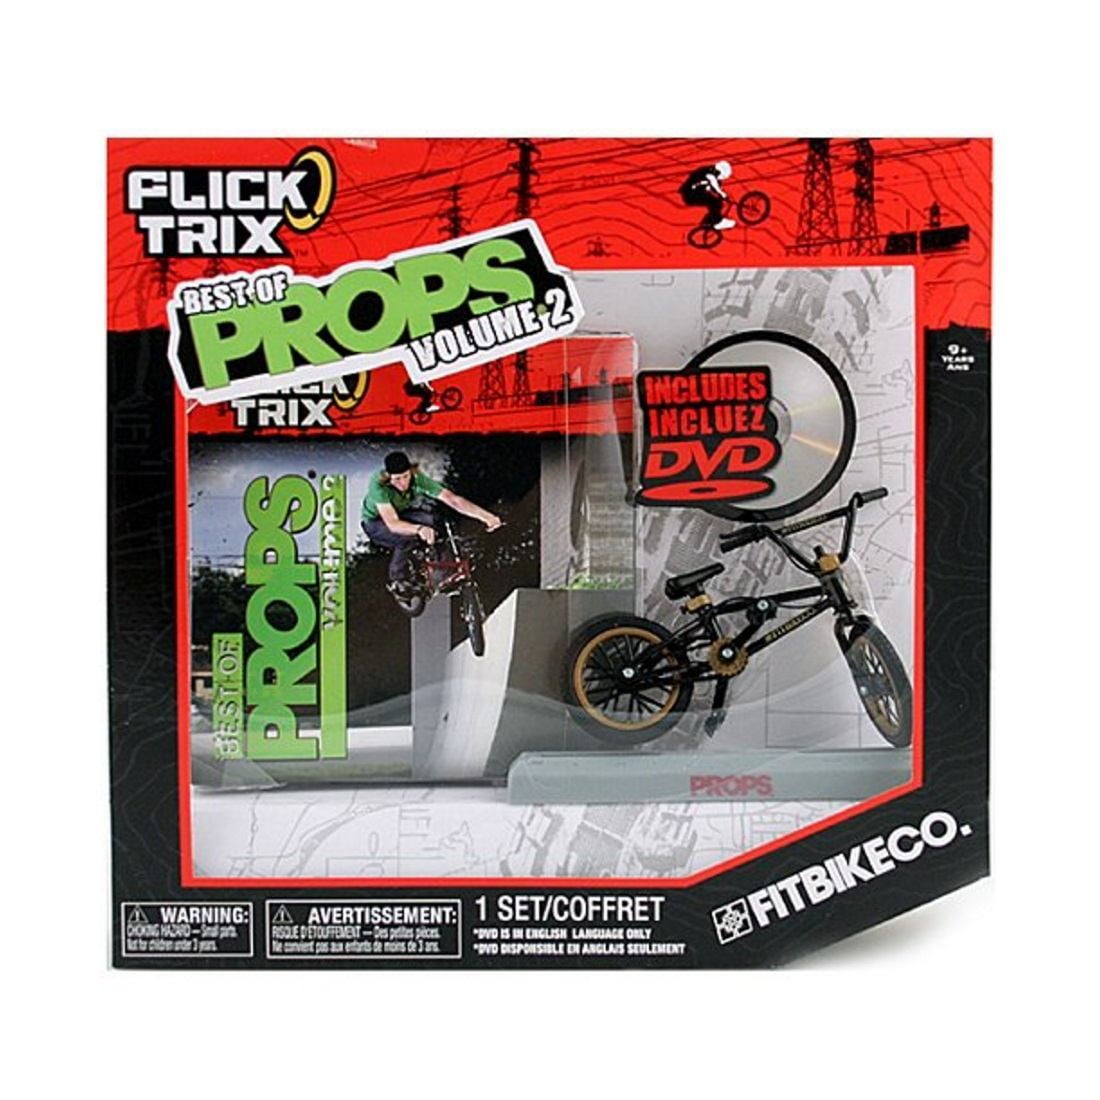 Flick Trix Bike Shop Assortment Colors and Styles May Vary 